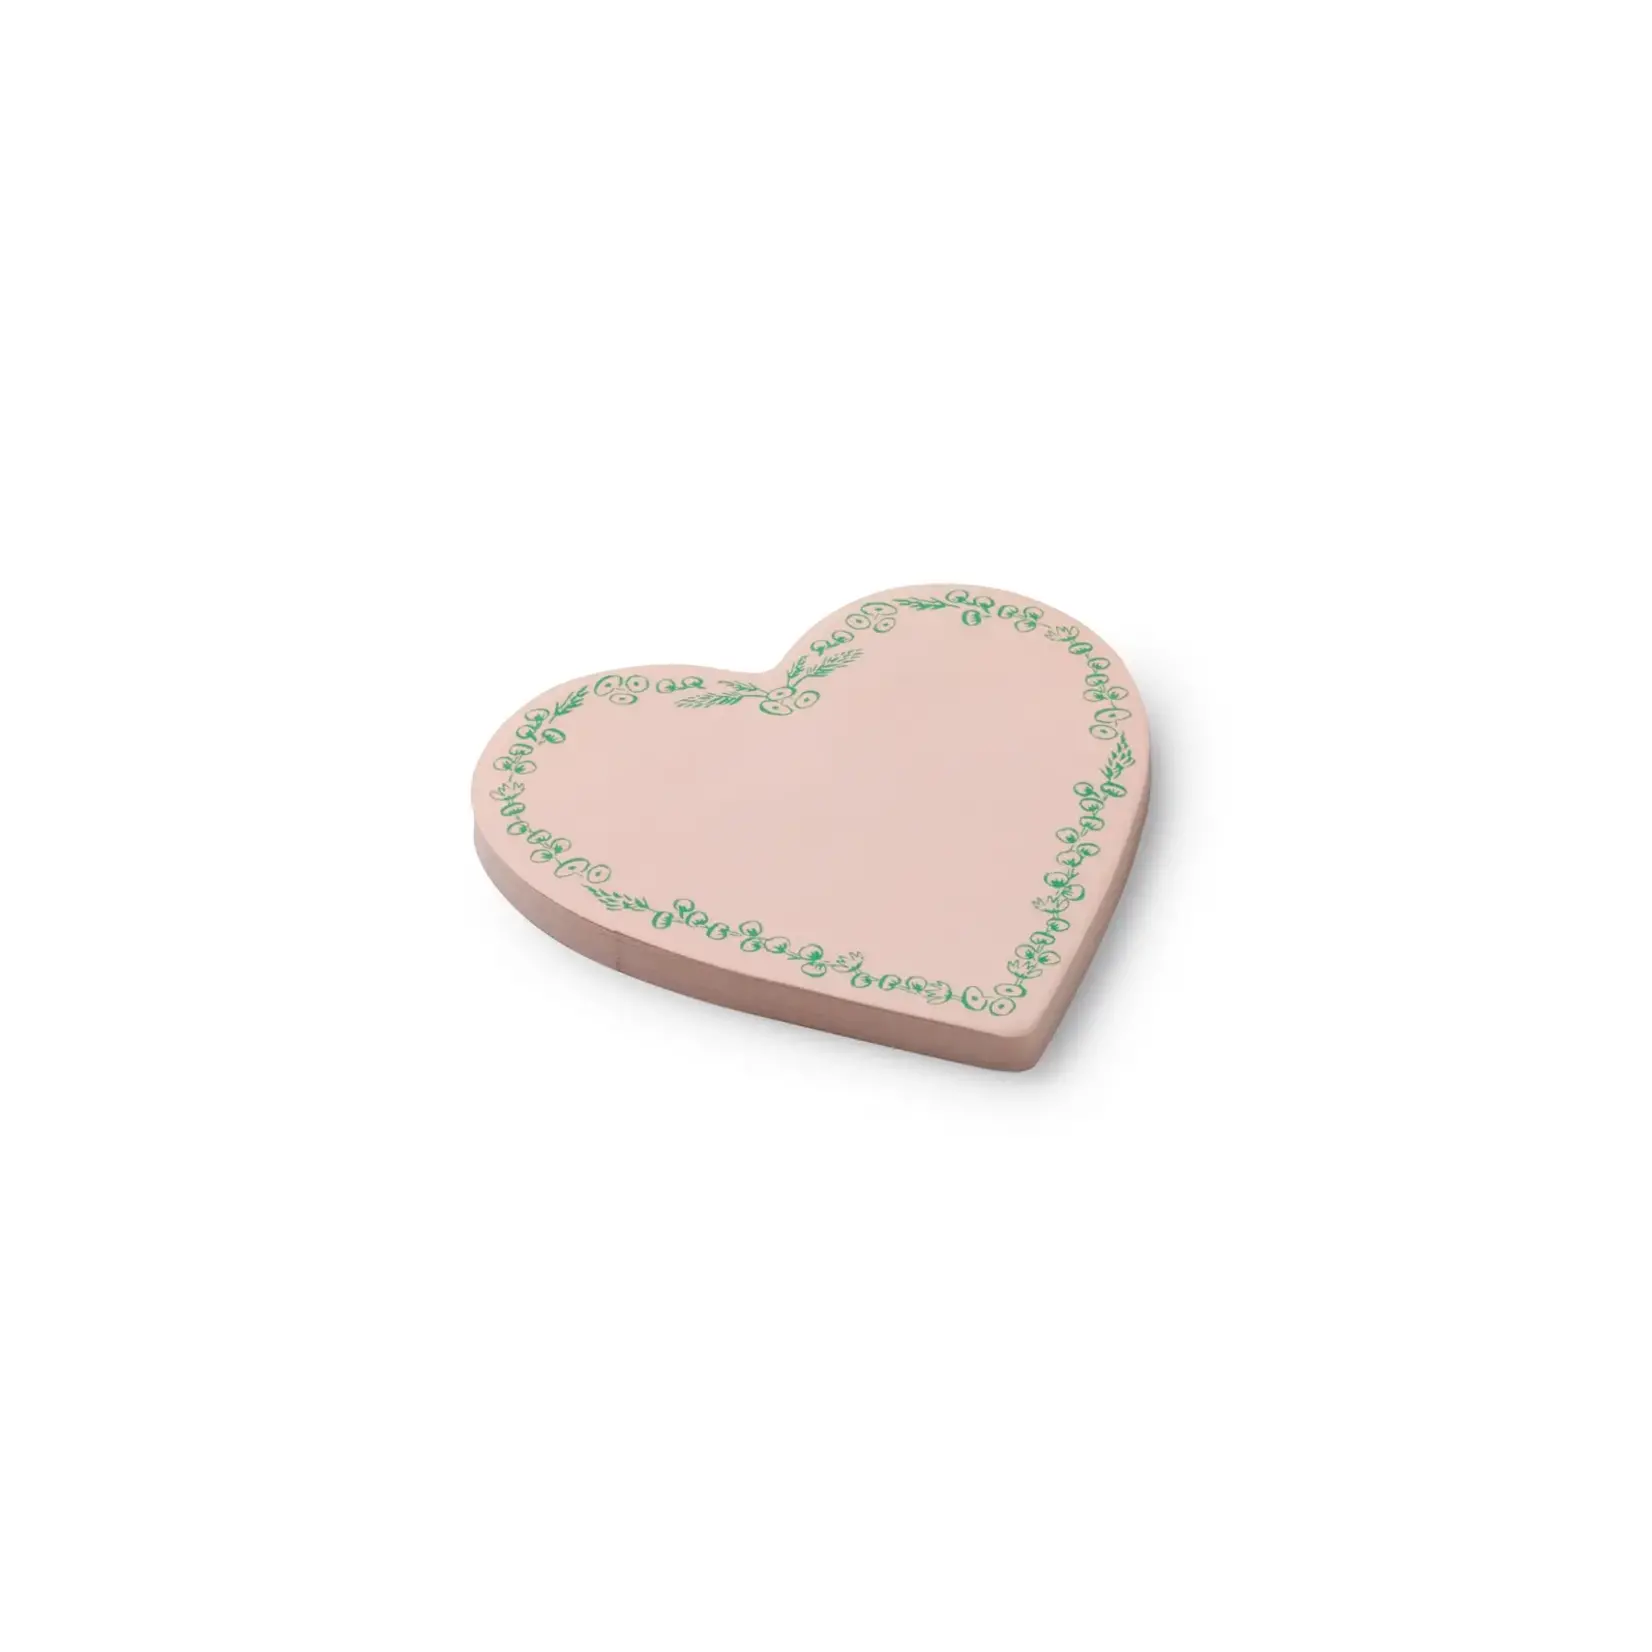 Rifle Paper Company Heart Sticky Notes